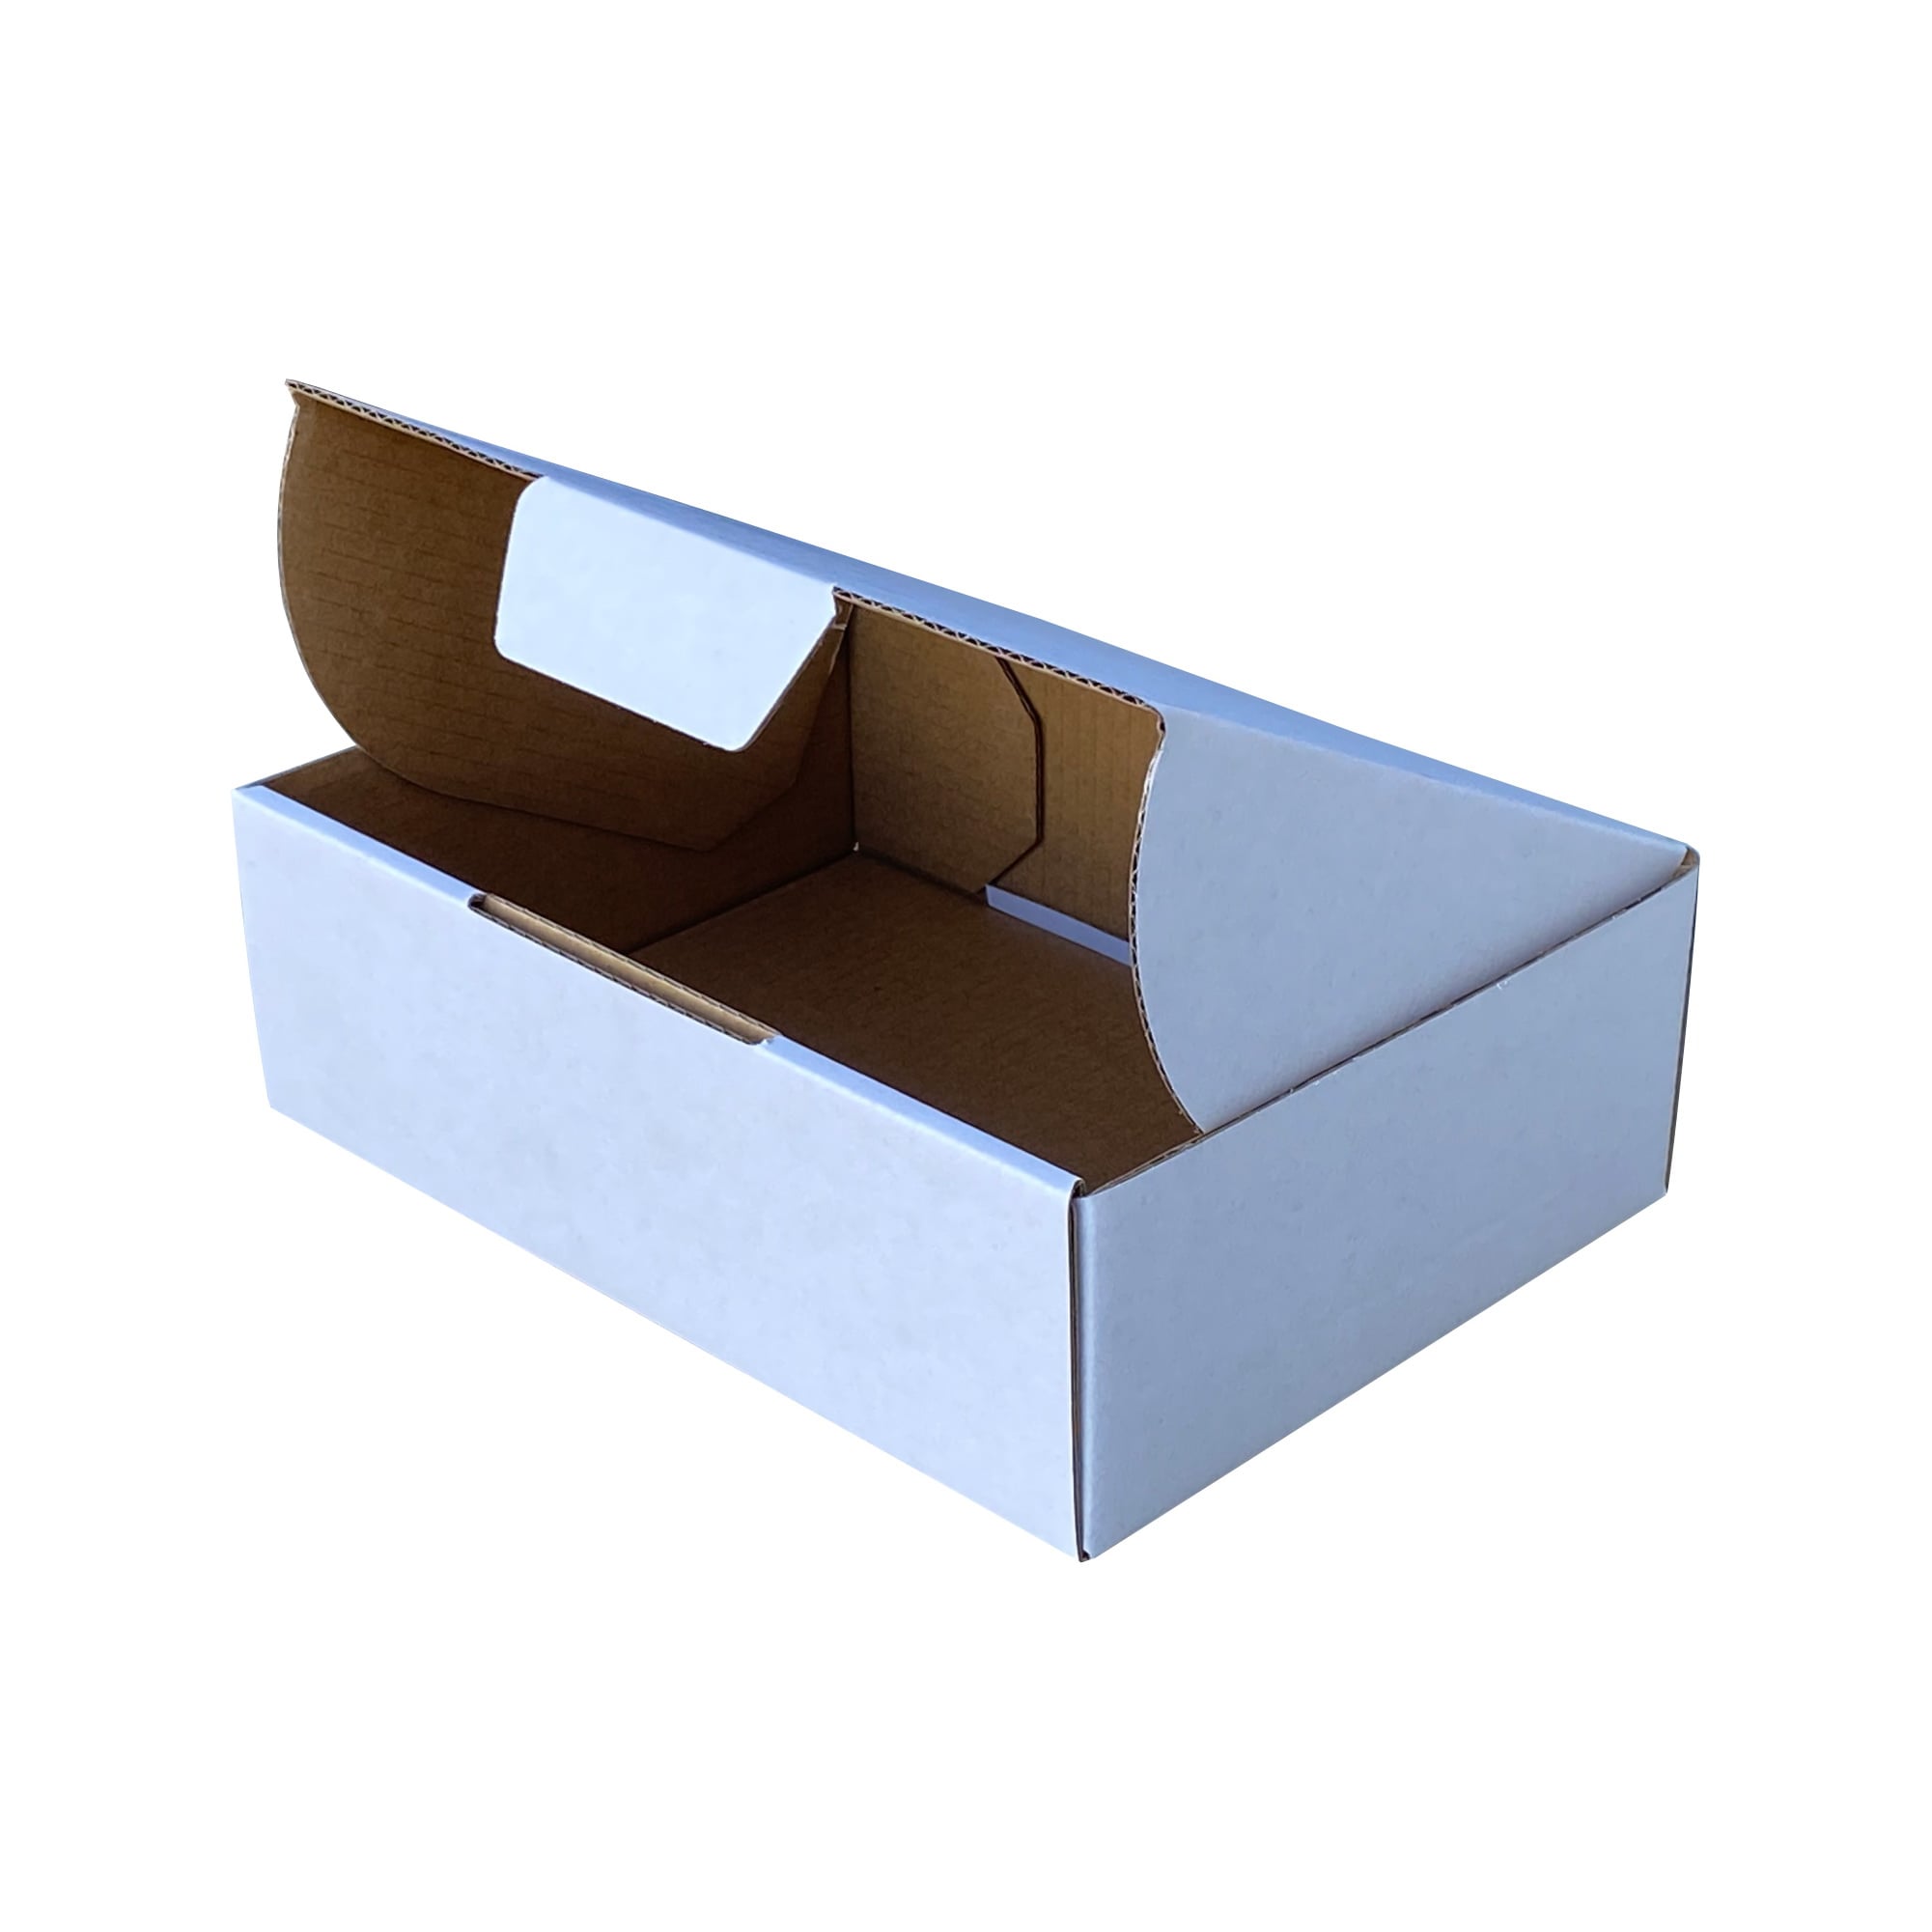 Mailing Boxes Wholesale Shipping Postage Cardboard Boxes Australia